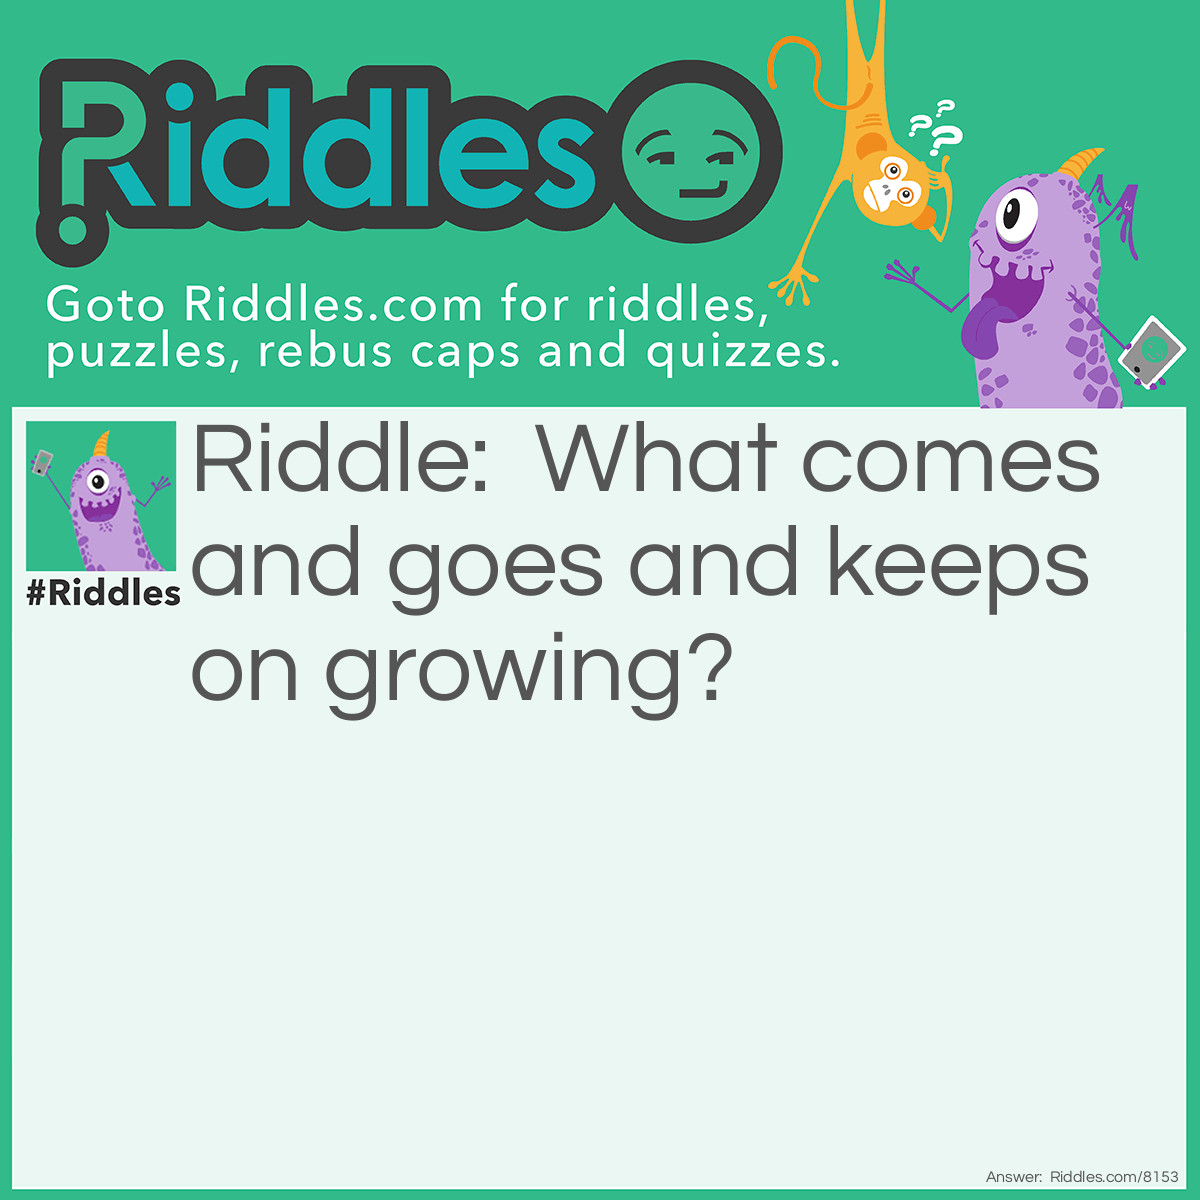 Riddle: What comes and goes and keeps on growing? Answer: Time. Can also be: The sun.